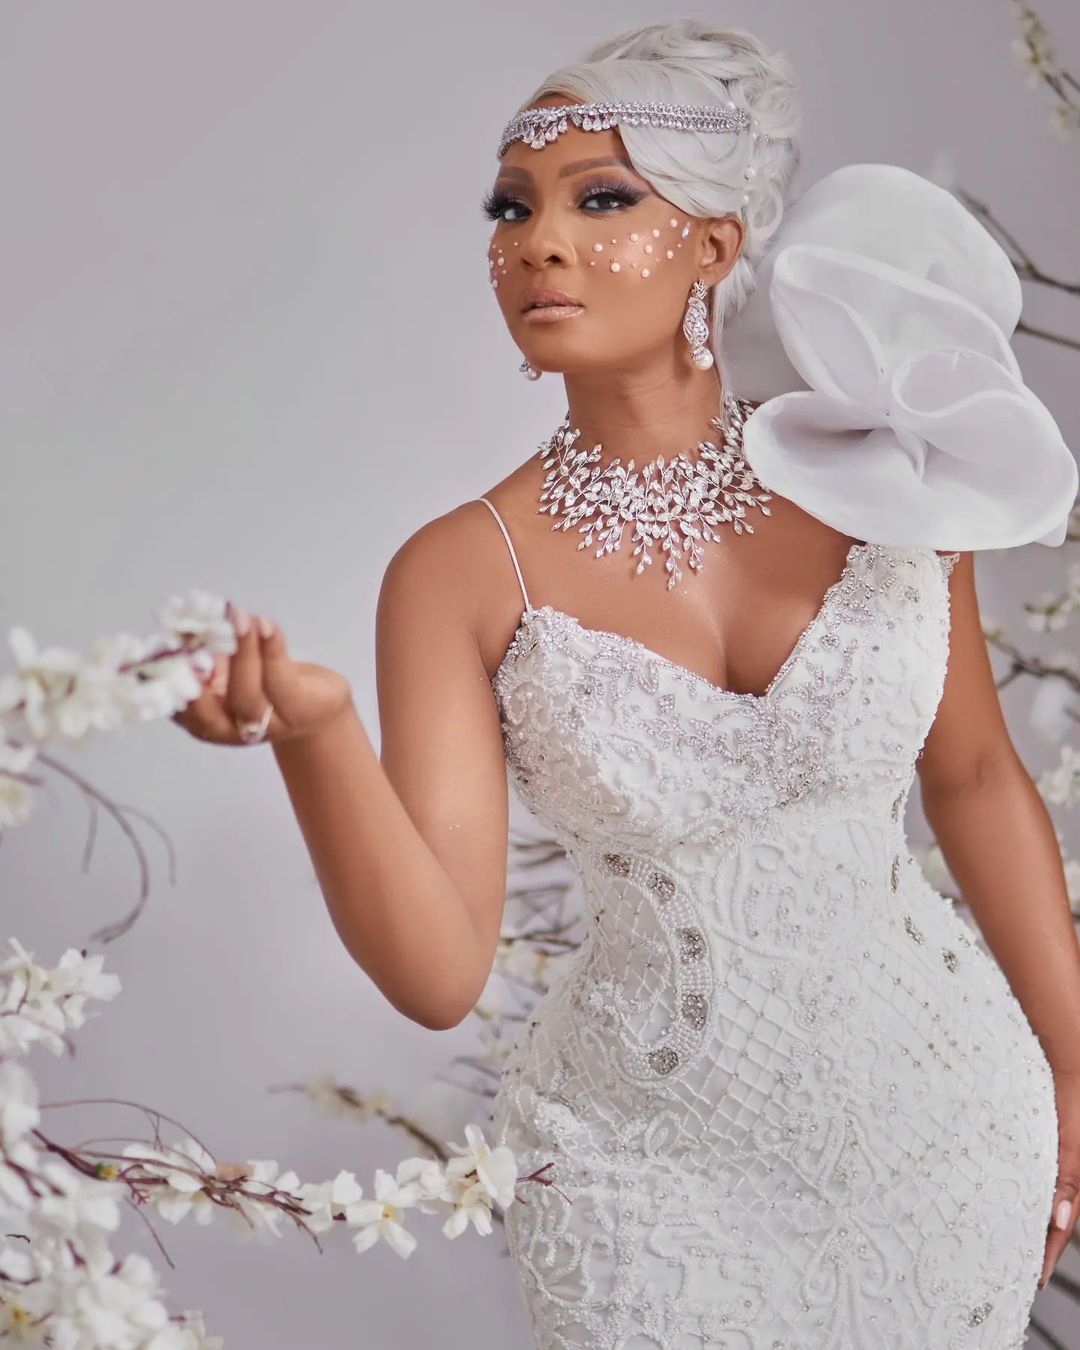 Osas Ighodaro Is An 'Ice Queen' In Tosho Woods Bespoke Luxury Bridal Collection